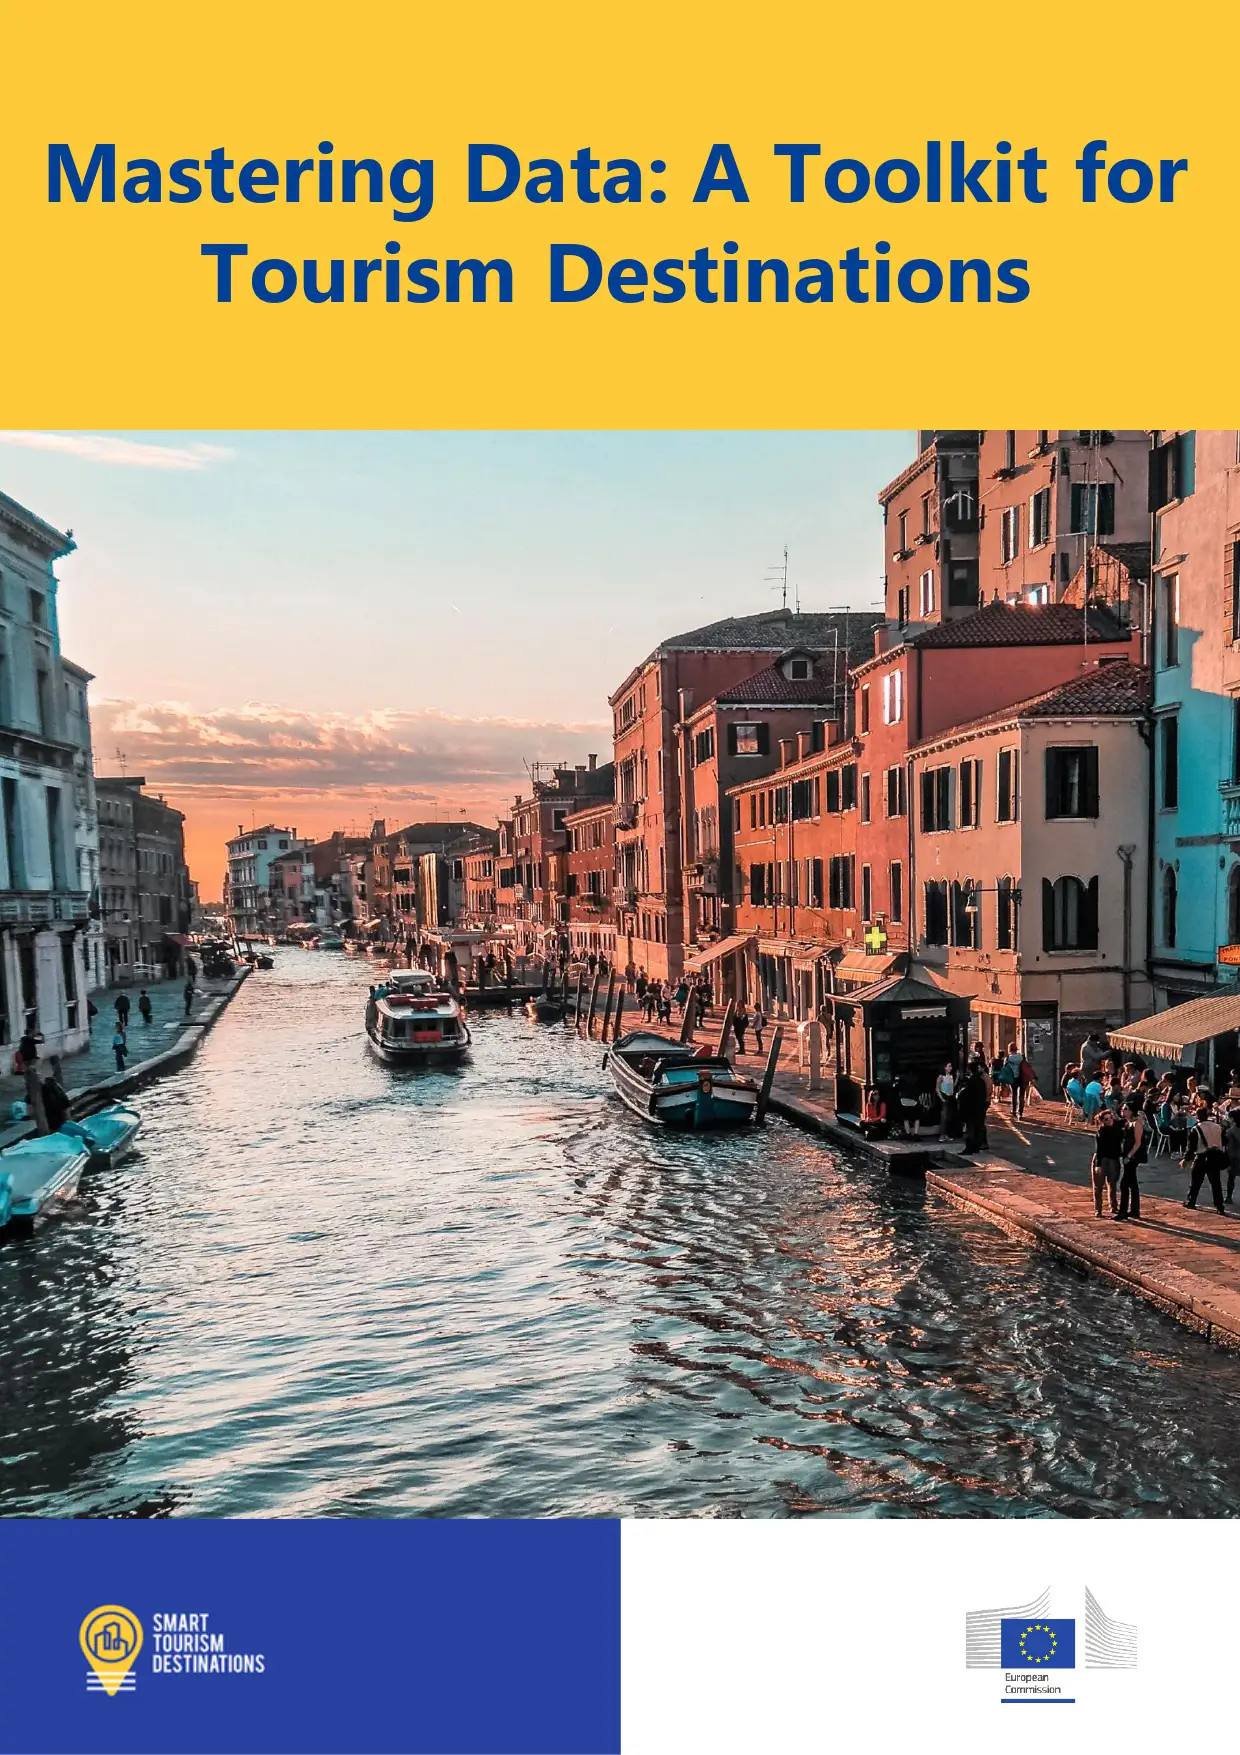 Get inspired and pick up new tools: innovative technologies and smart solutions for tourism